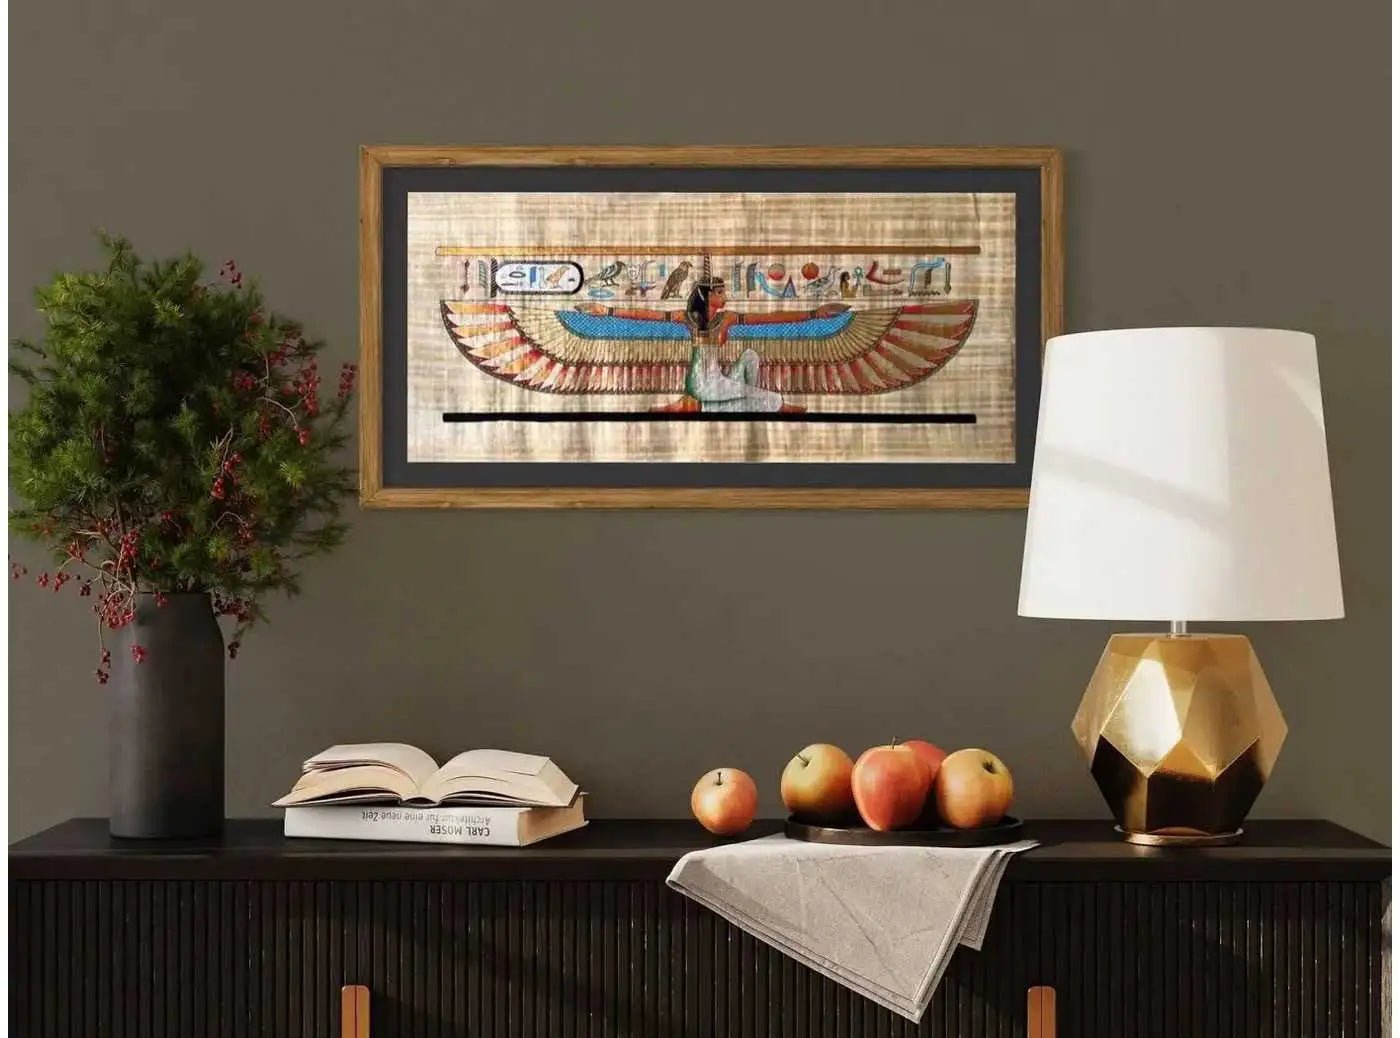 Extra Large Maat Wings - Egyptian Goddess Maat with Outstretched Wings Papyrus Art Print Wall Decor - 36x16 inches